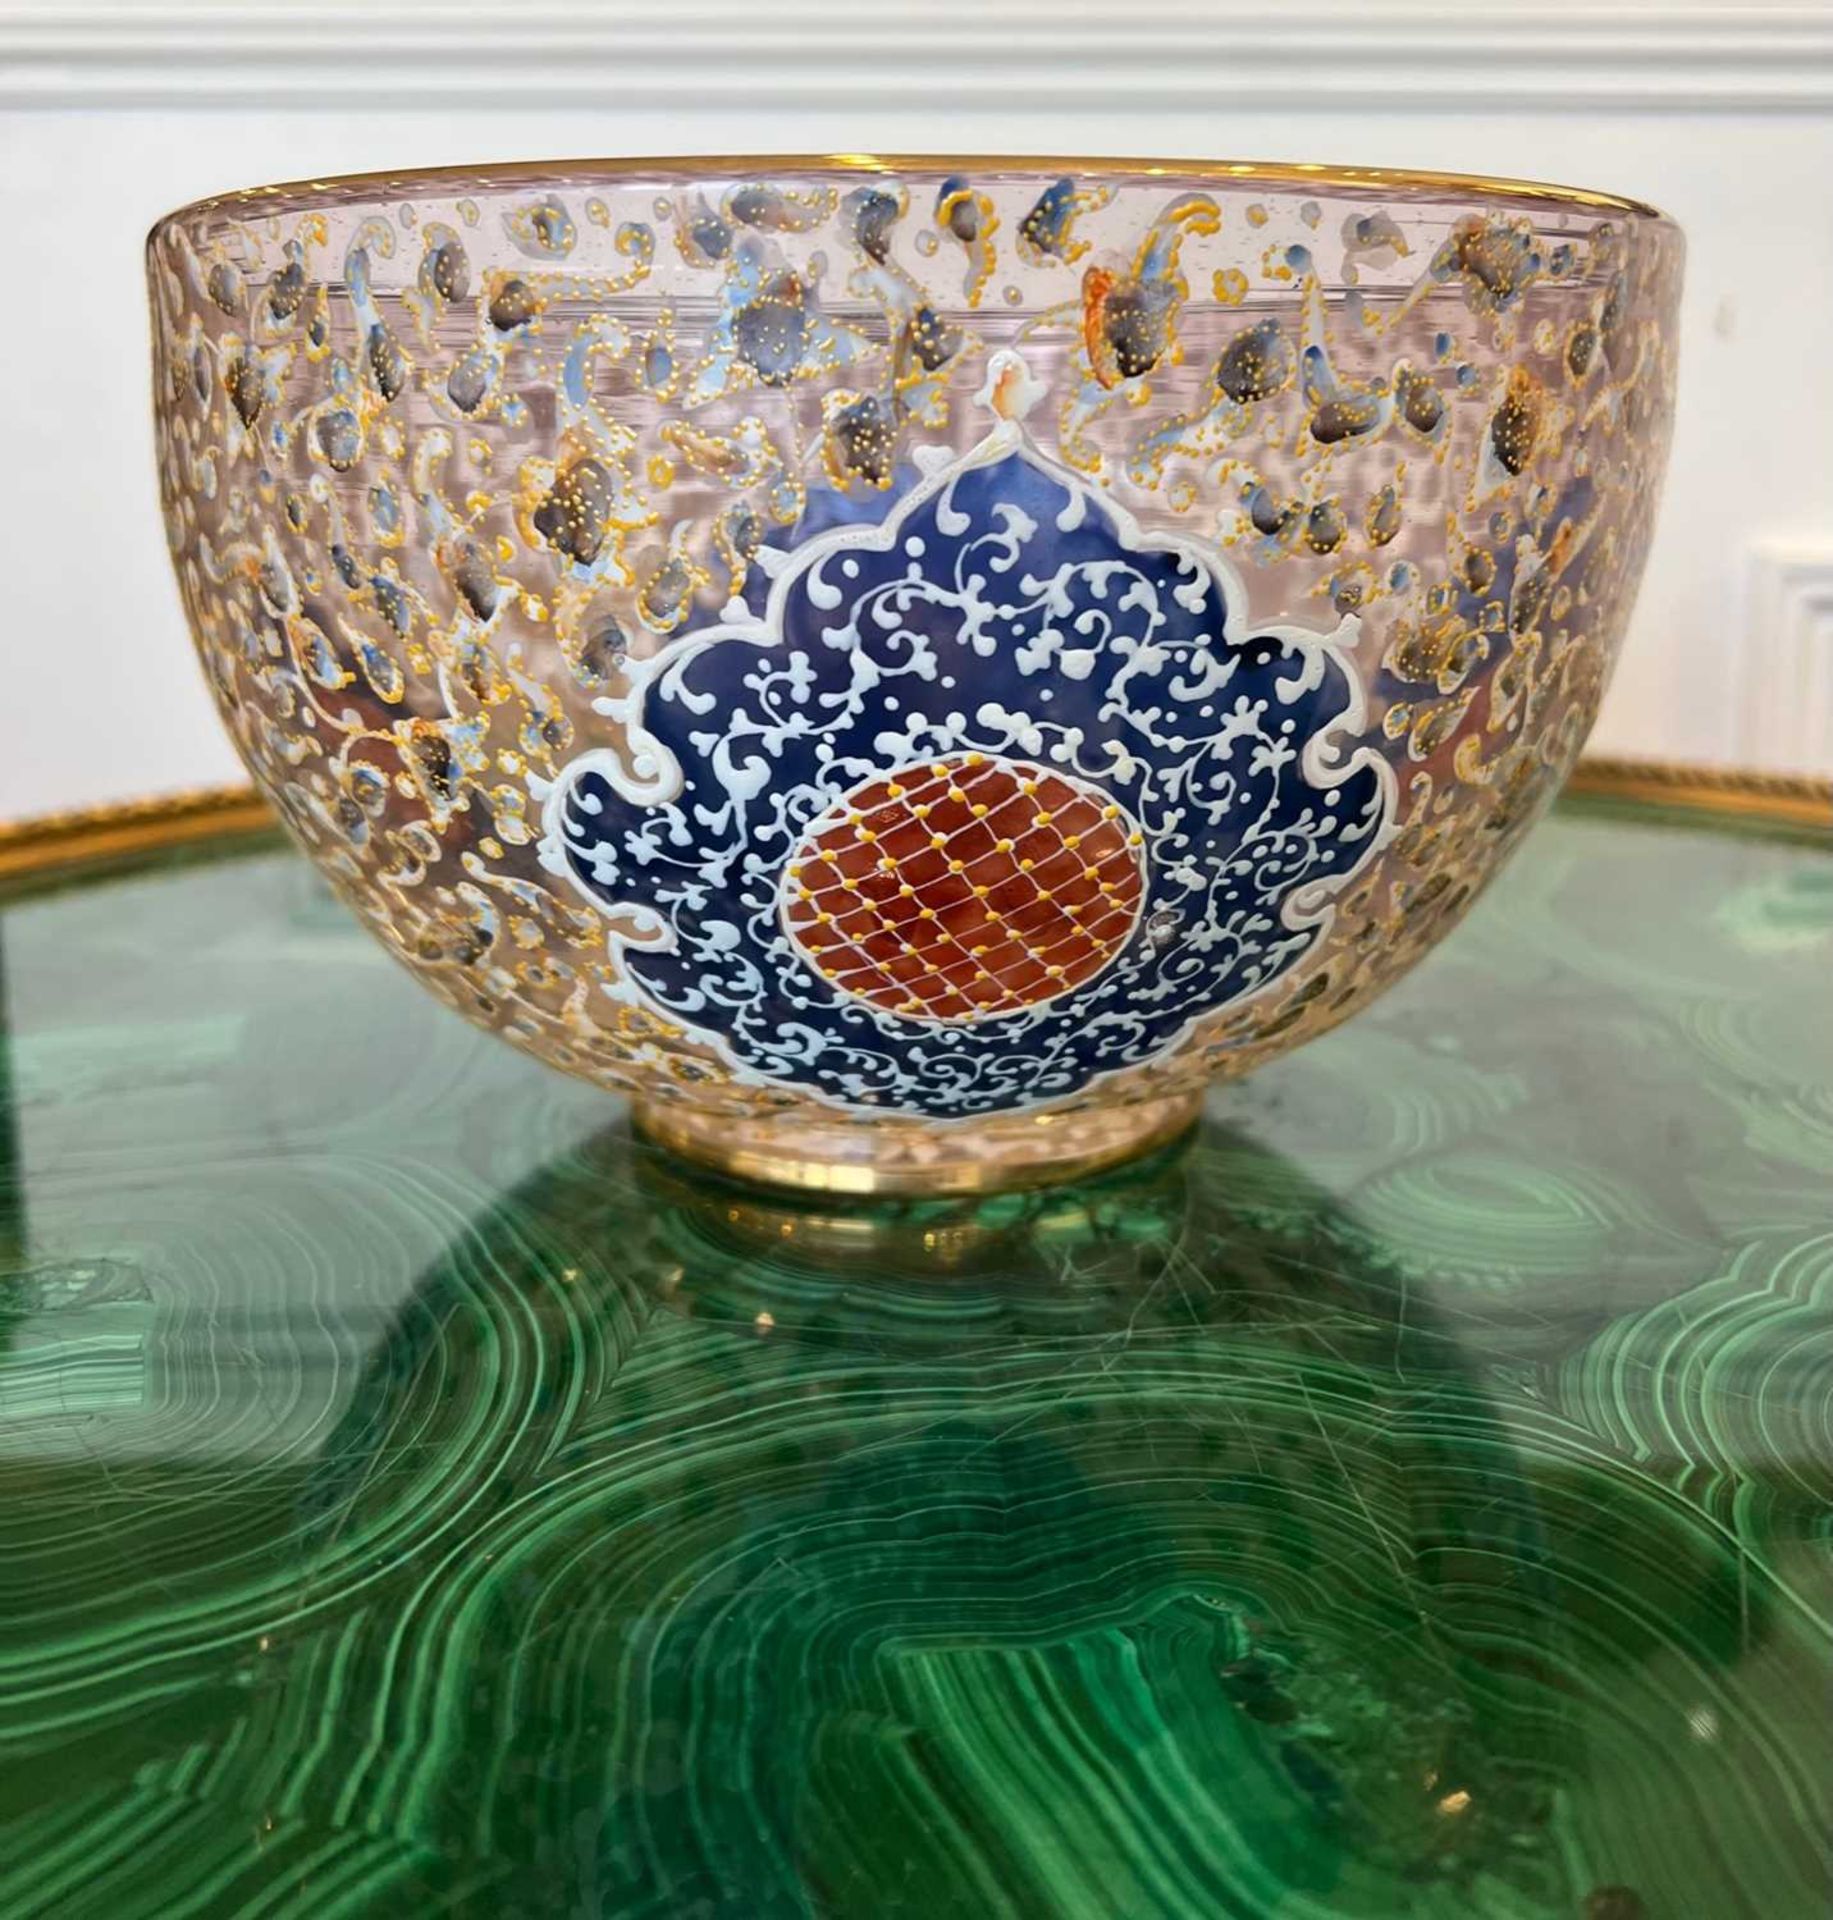 A PERSIAN STYLE ENAMELLED GLASS BOWL - Image 6 of 7